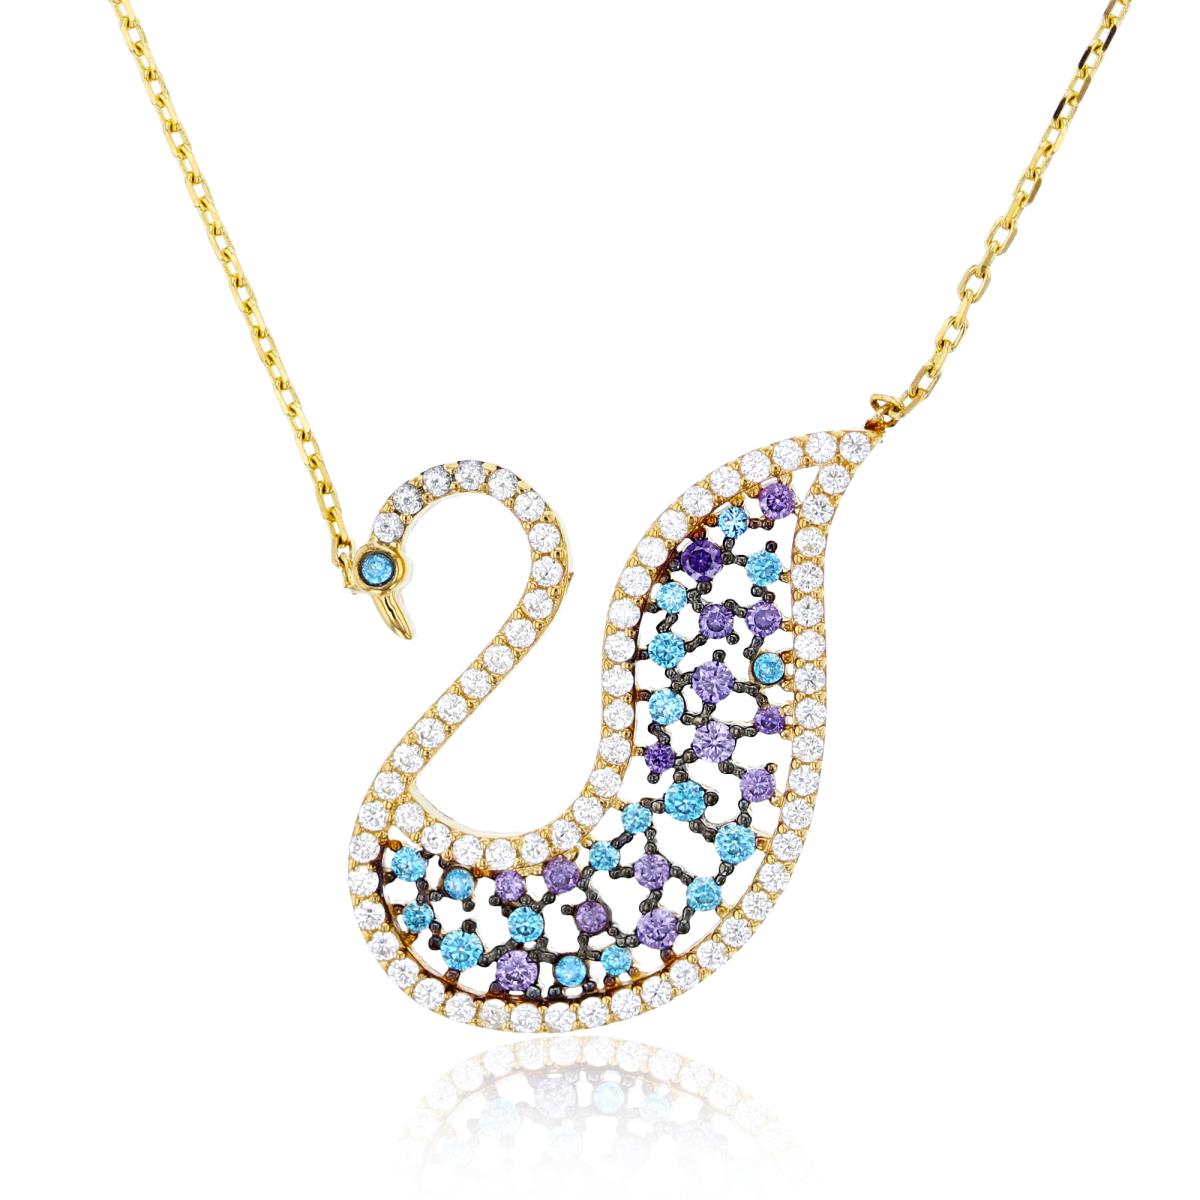 14K Yellow Gold Rnd Multicolor CZ Swan 17.5"Necklace